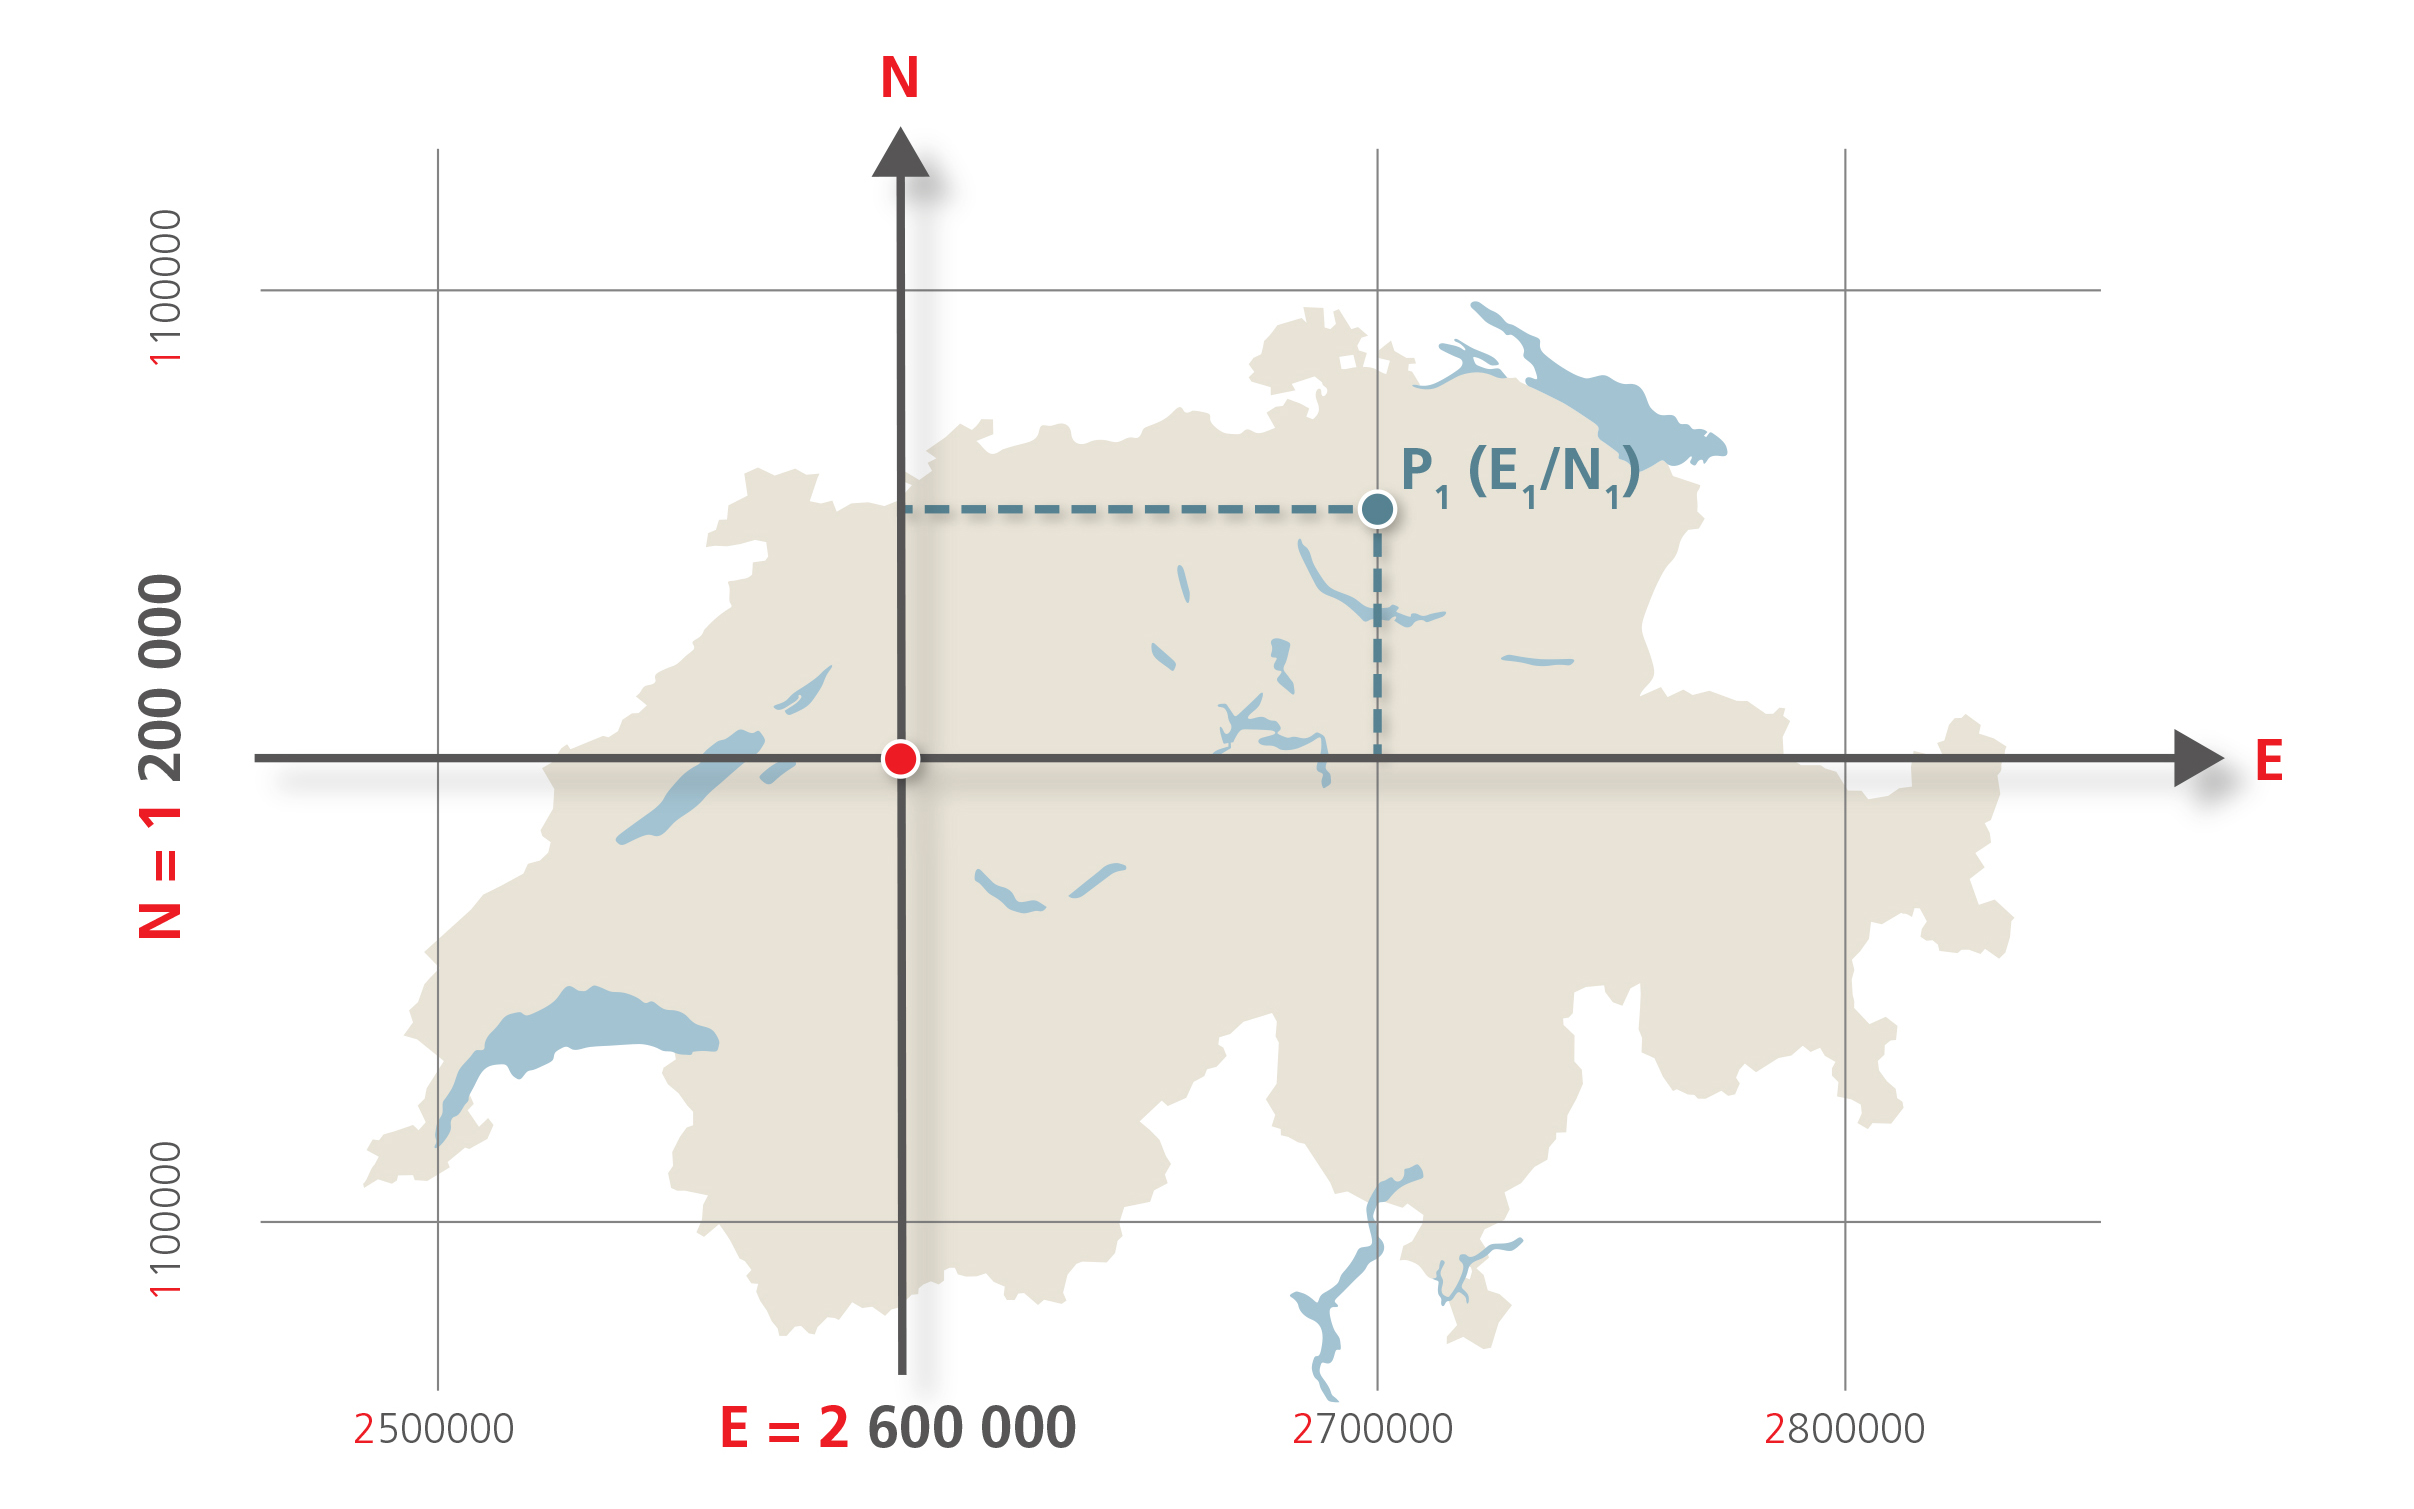 The illustration shows how the Swiss coordinates are created. The starting point of the coordinate system is the Old Observatory in Bern, which today has the coordinates 1 200 000 / 2 600 000.